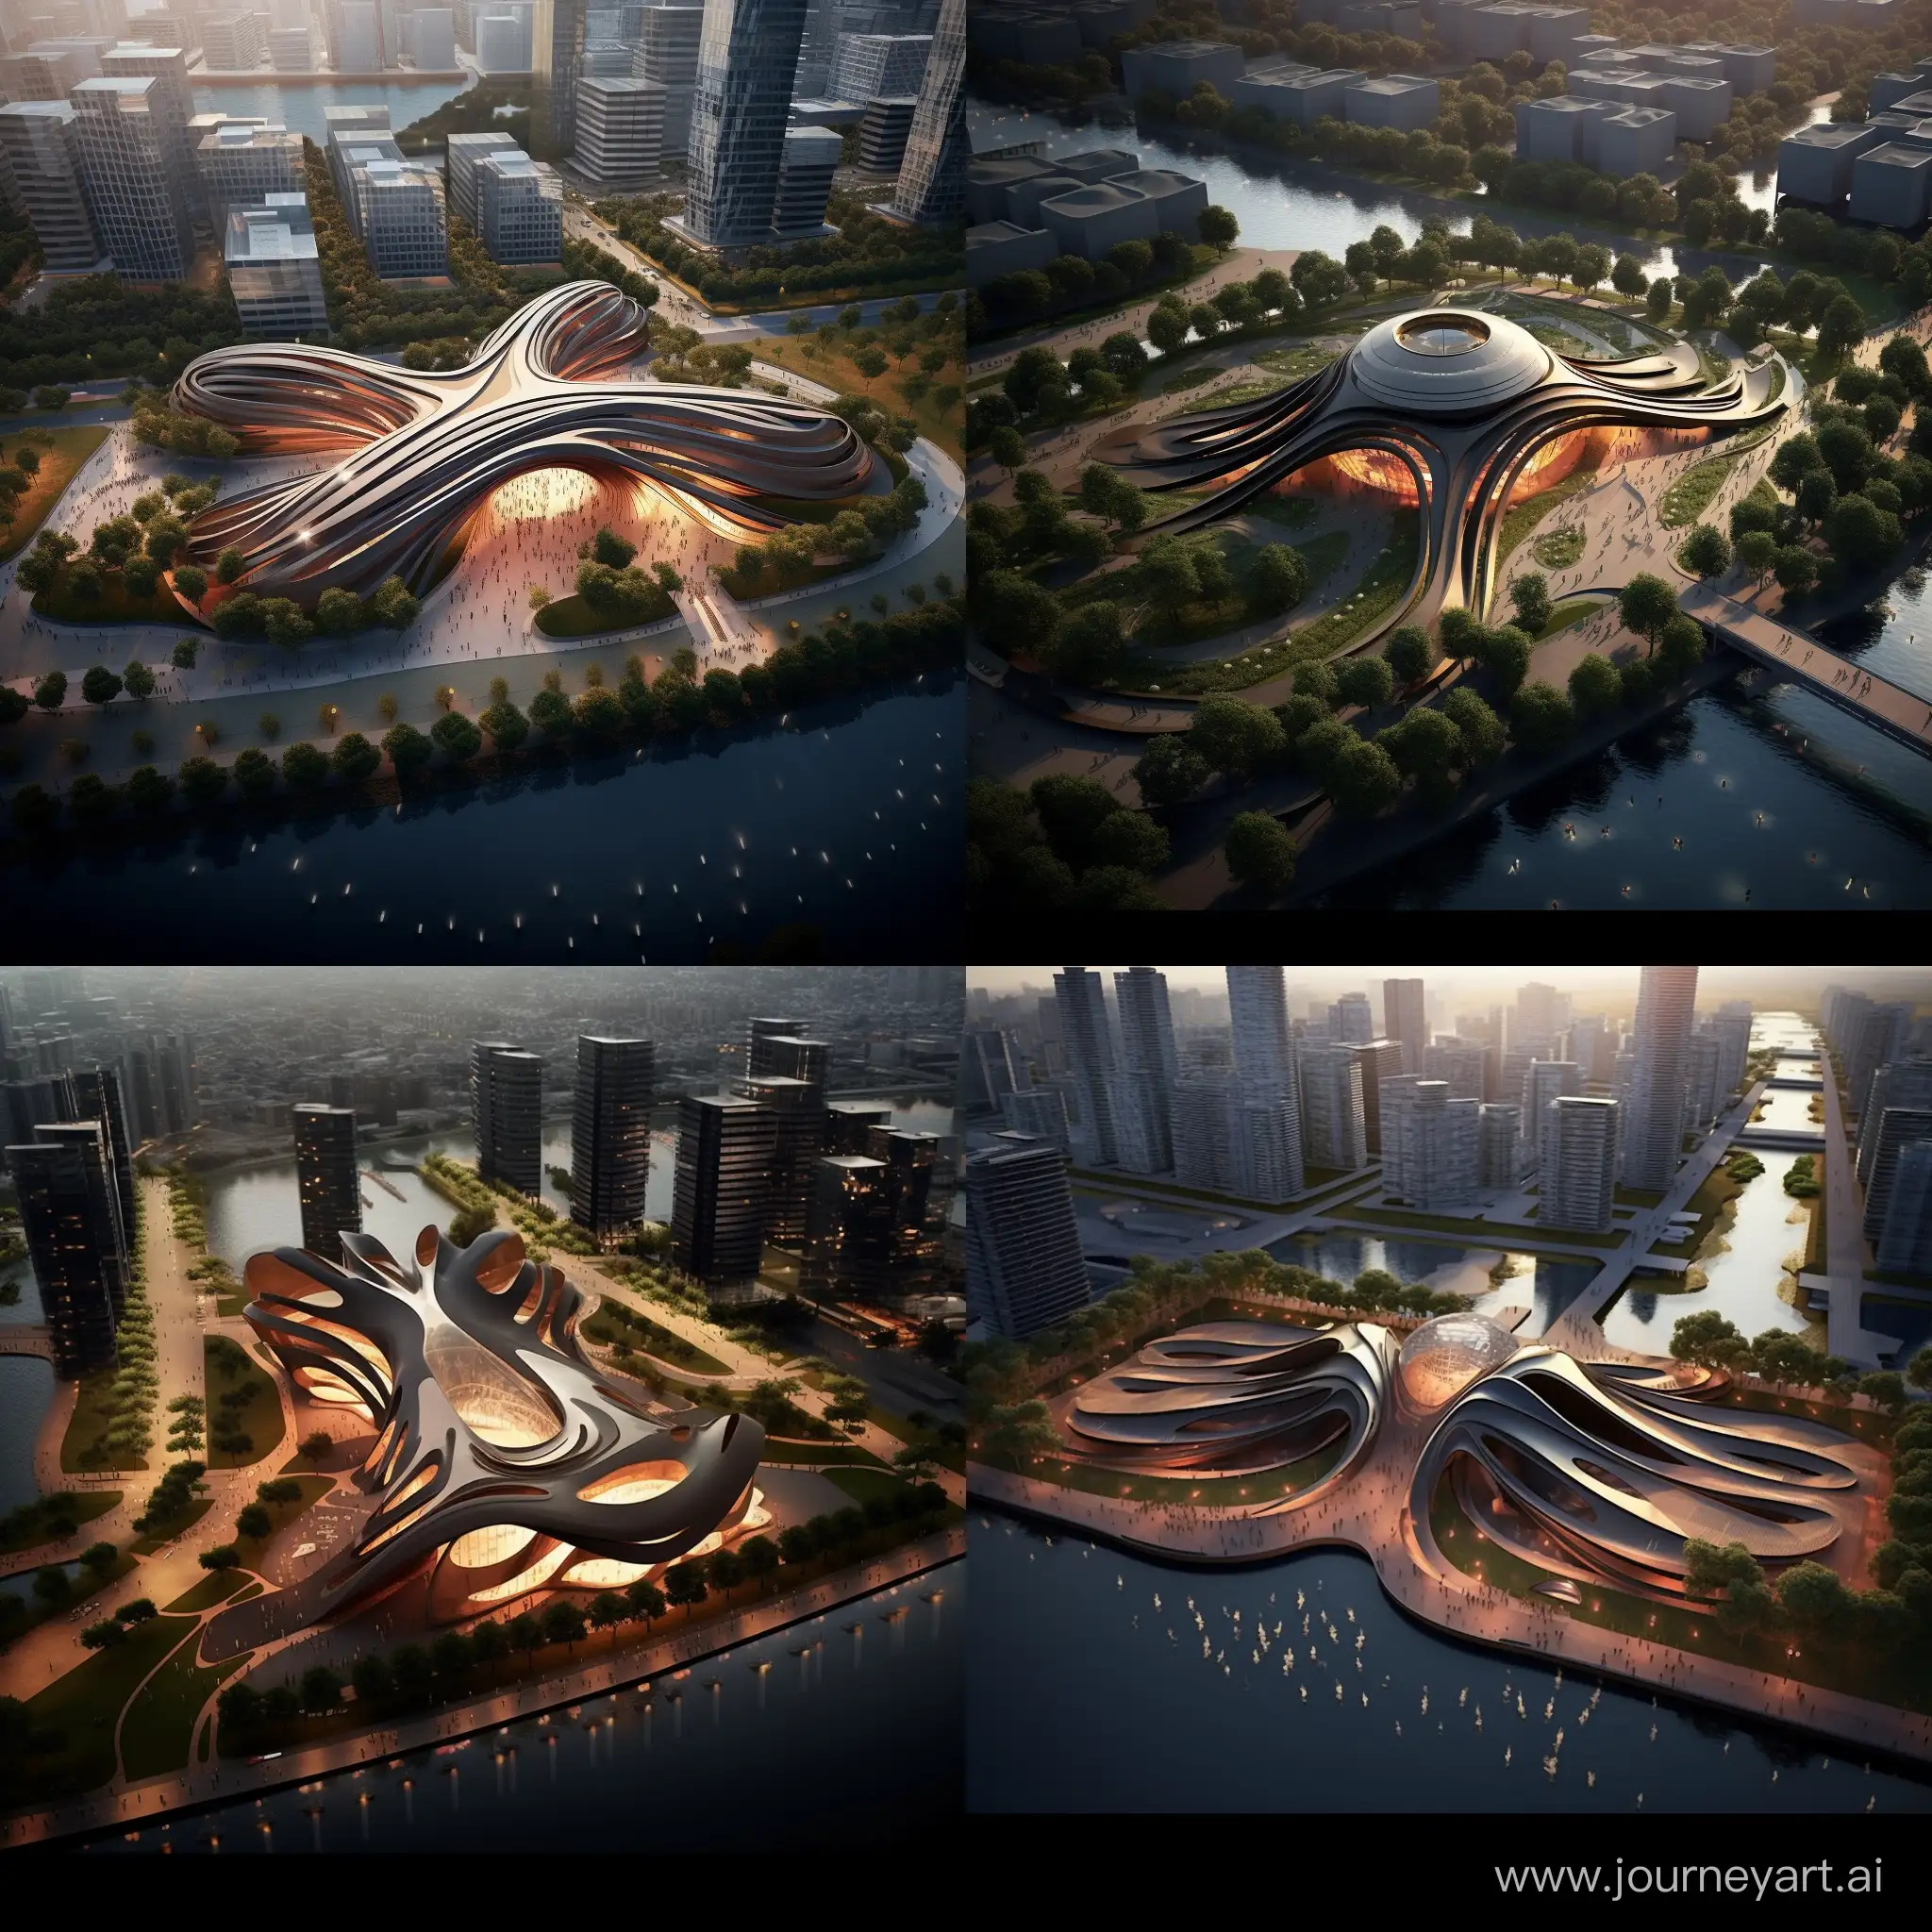 Futuristic-Urban-Park-on-the-Water-Dynamic-Black-Leather-and-LED-Lights